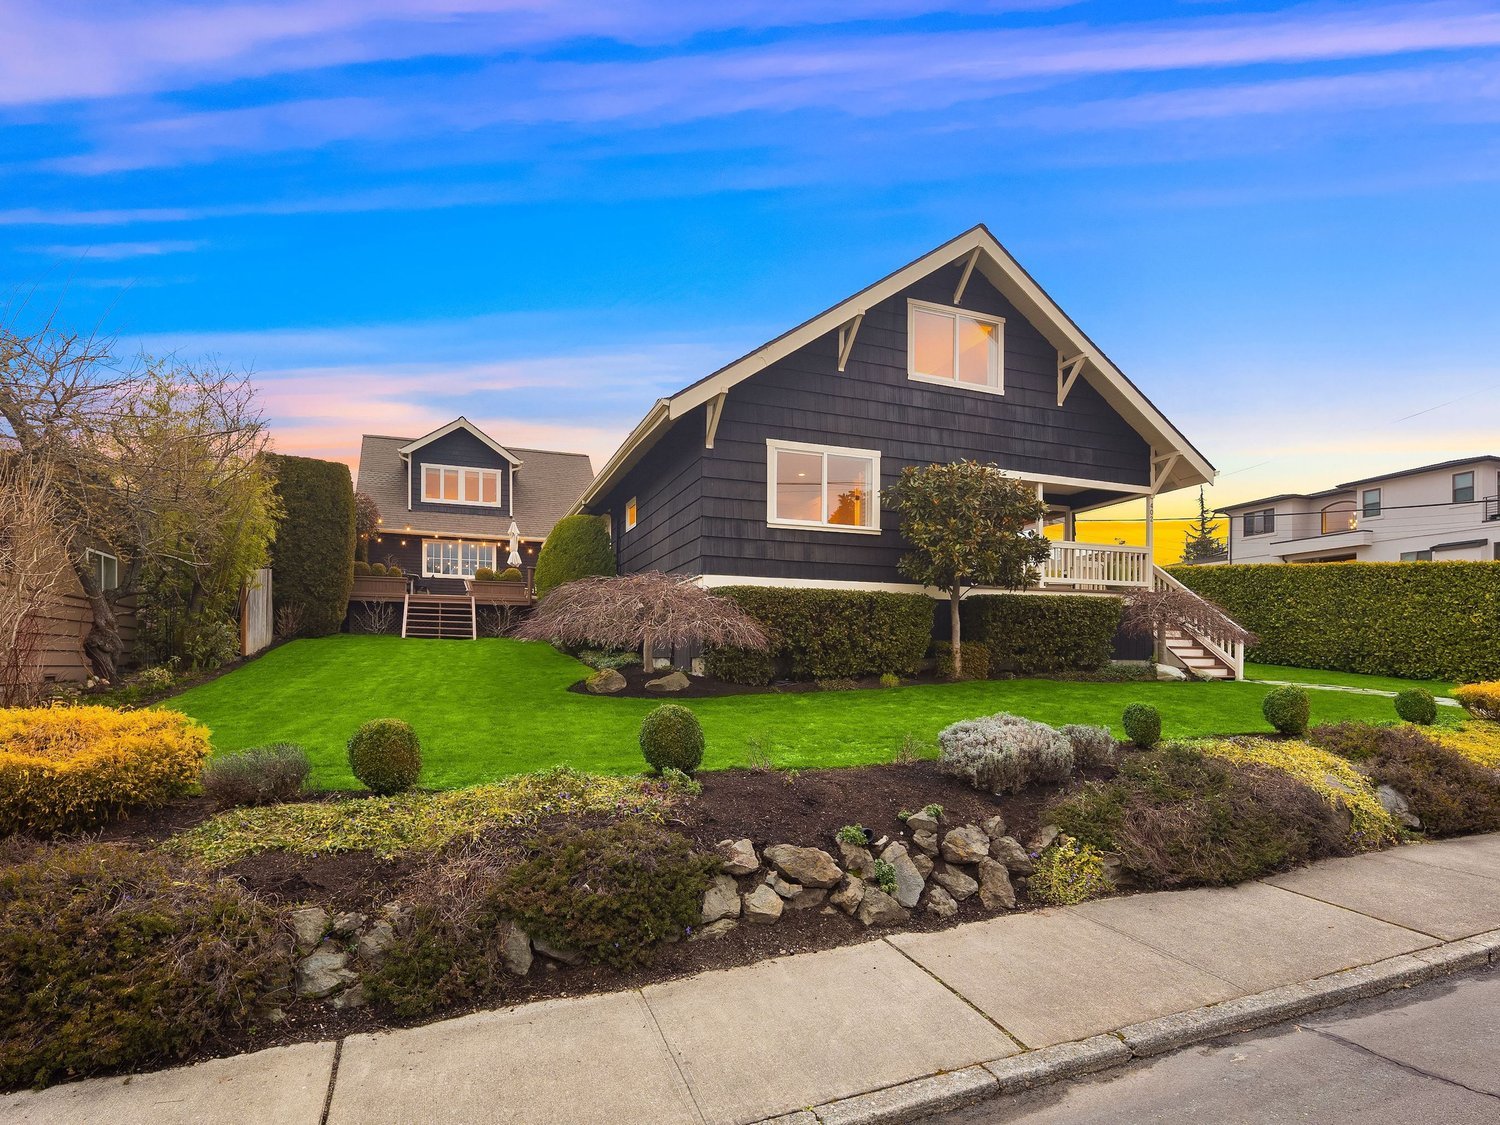 402 10th Ave W, Kirkland | Sold for $3,050,000